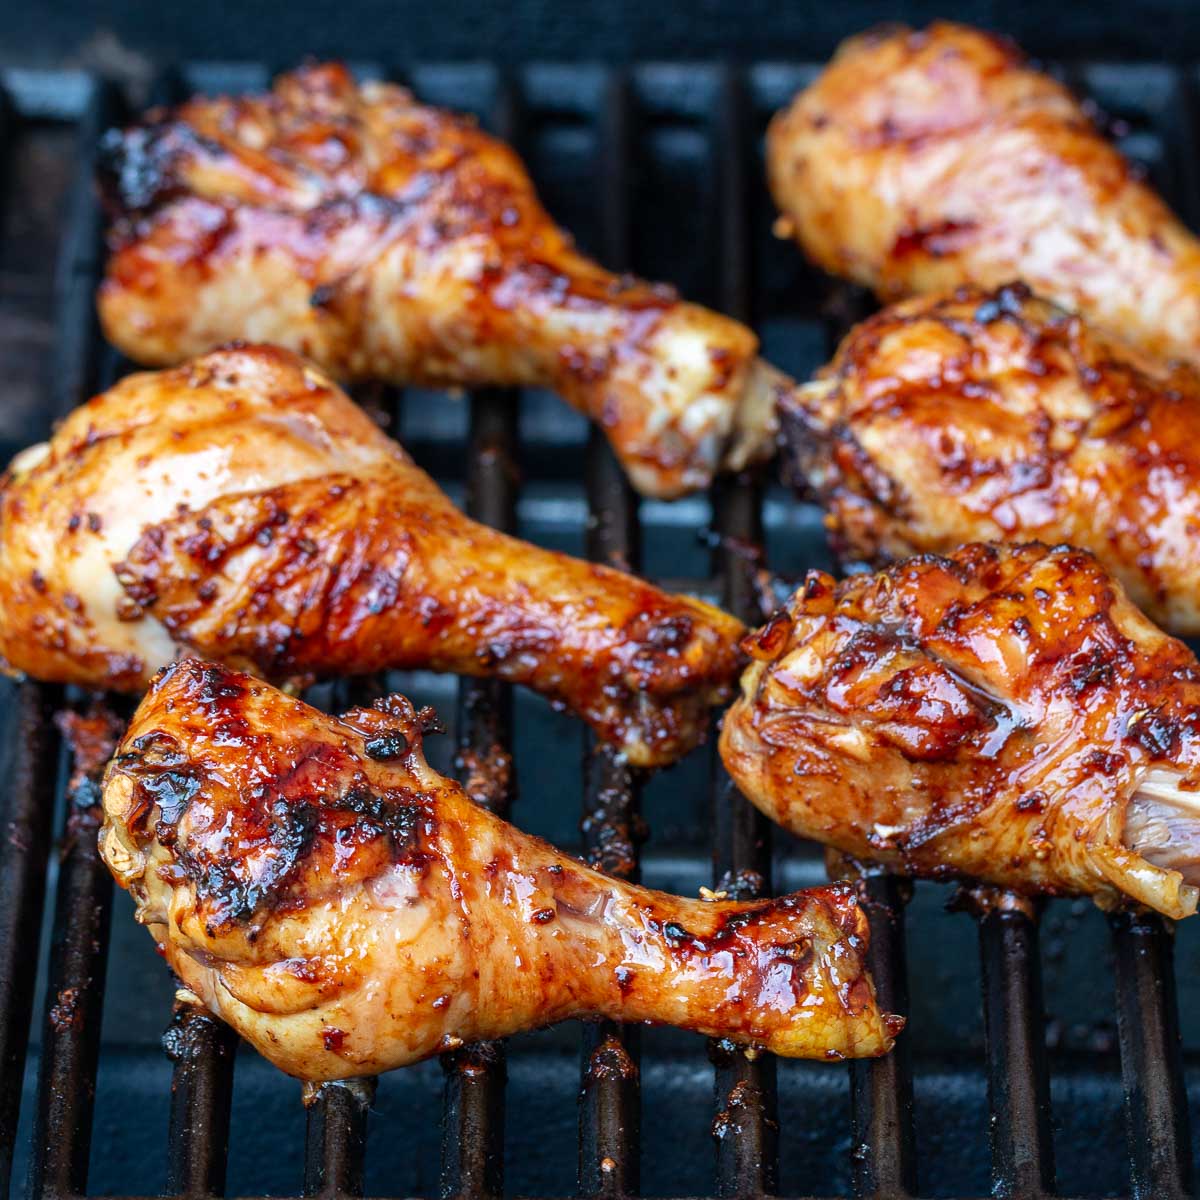 Chicken drumsticks on the gas grill.